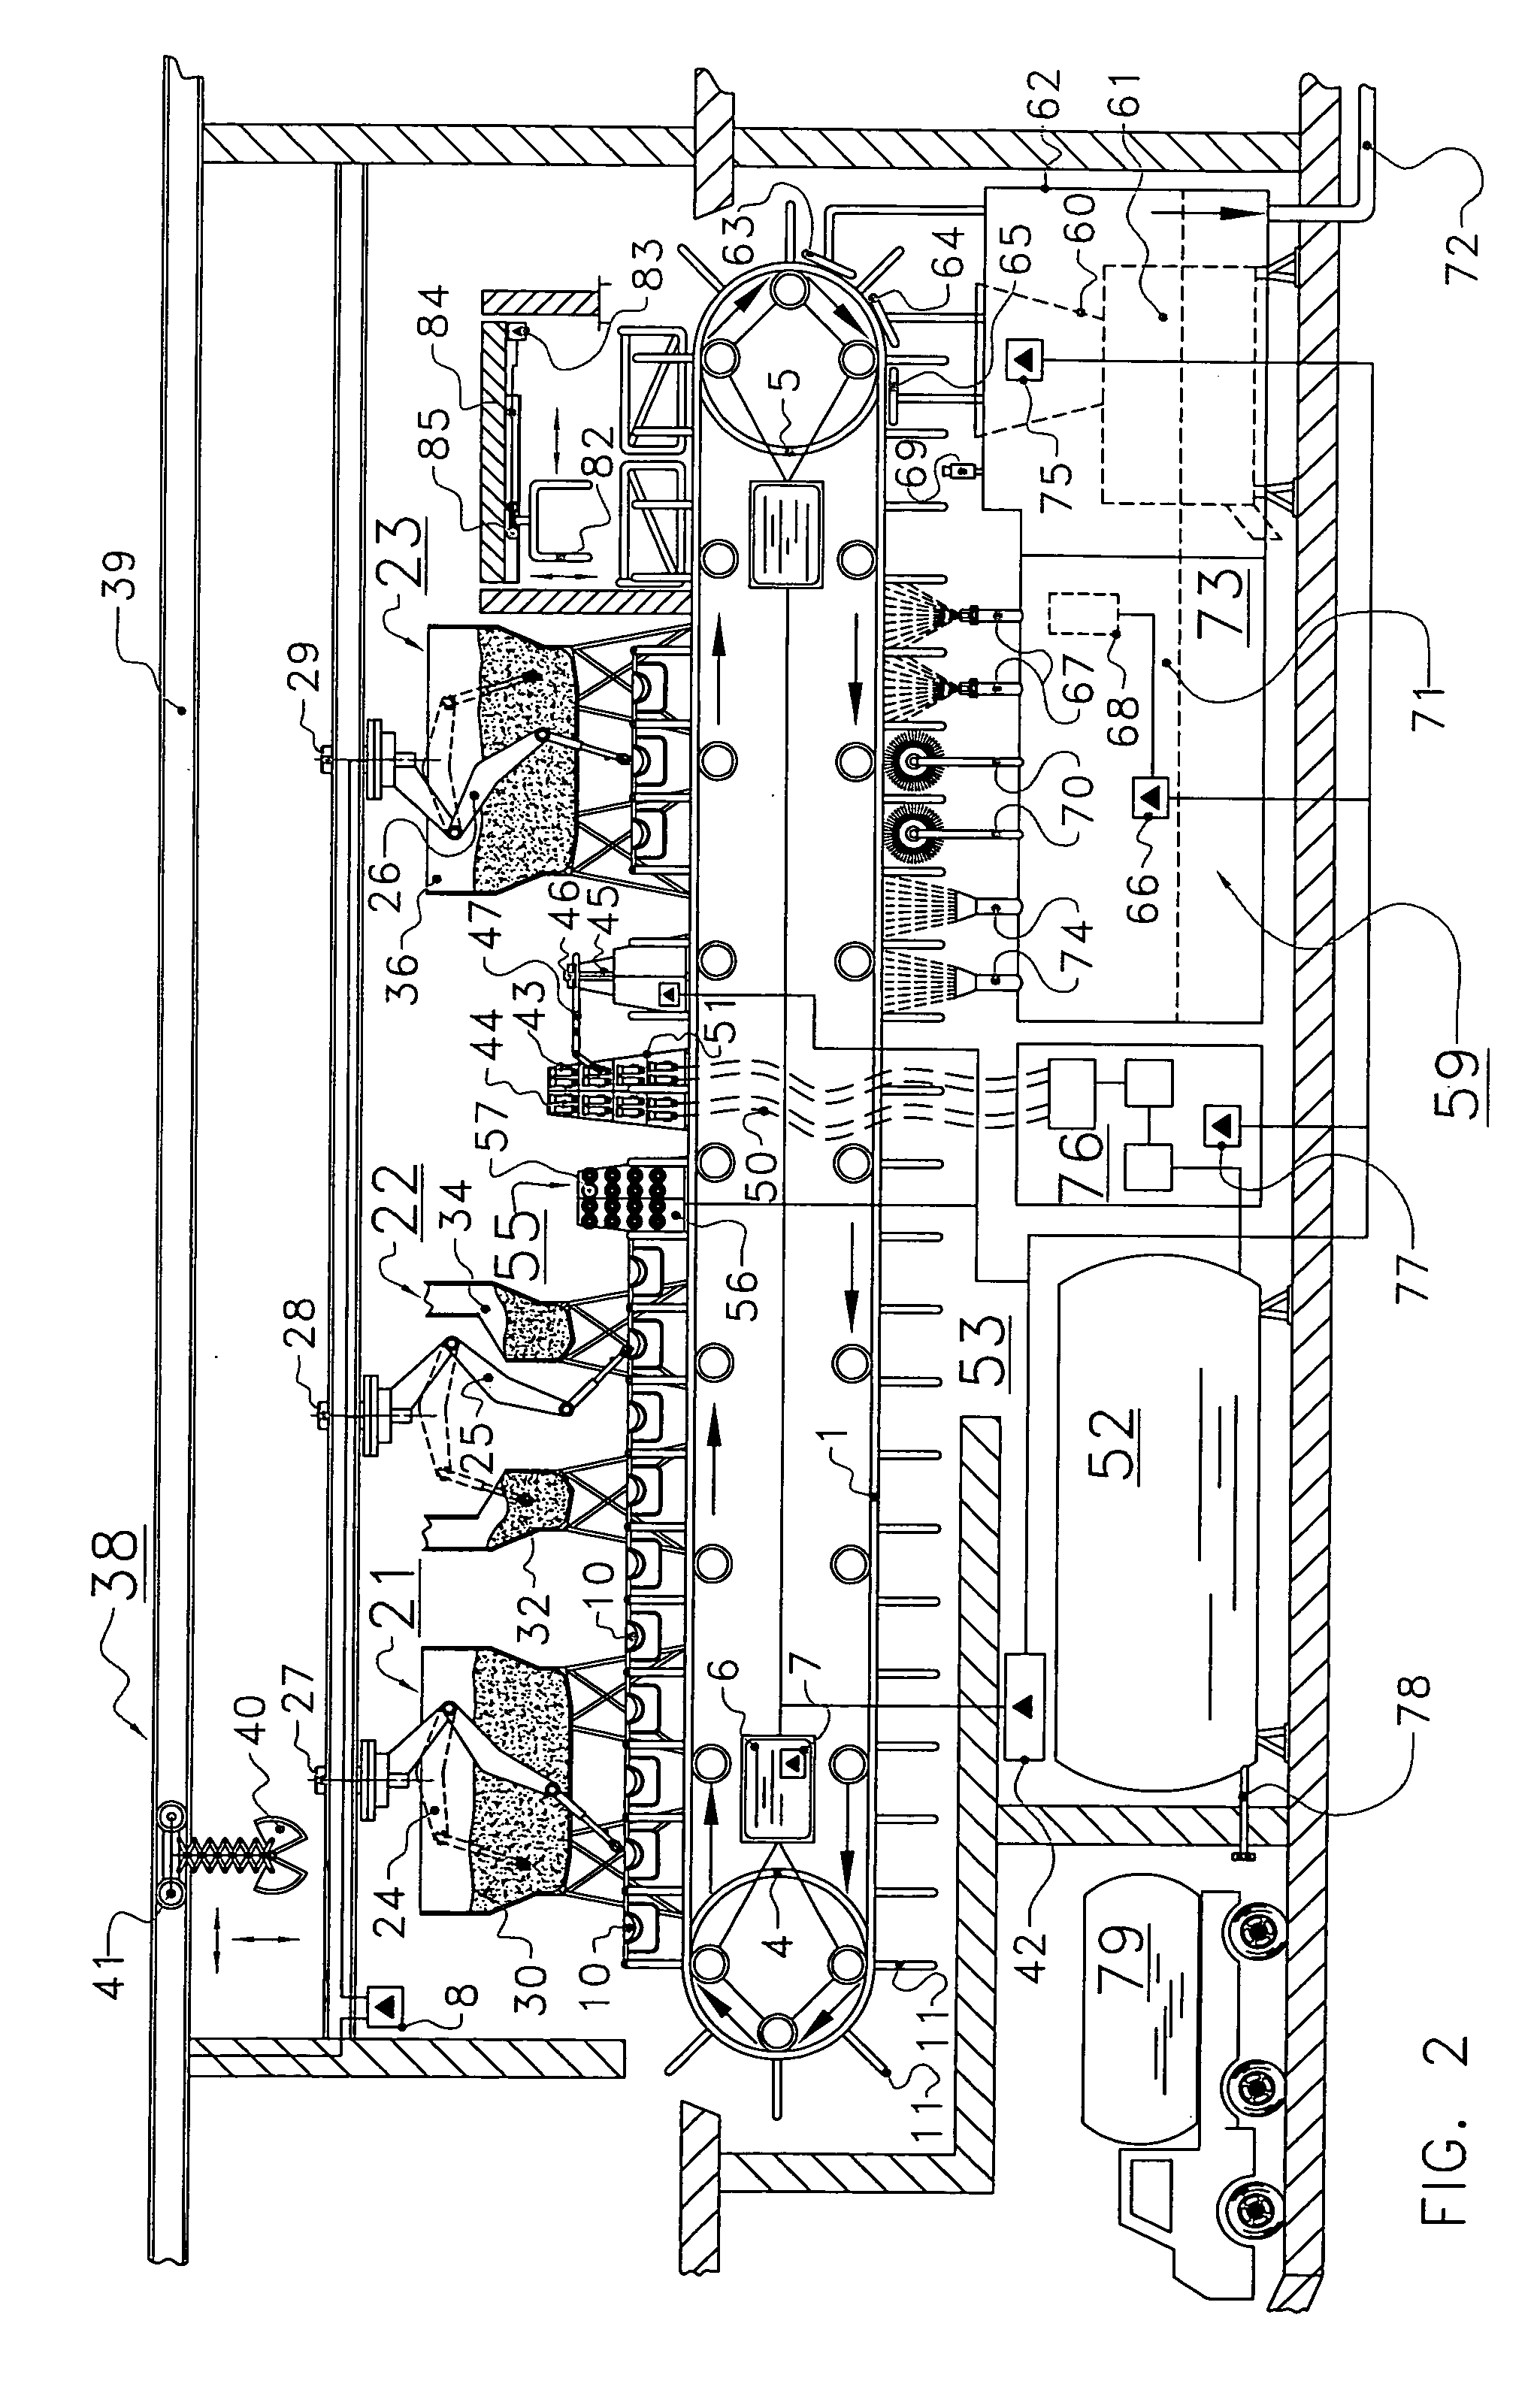 Assembly for and a method of feeding and milking animals, a feed platform, a milking pre-treatment device, a milking post-treatment device, a cleaning device, a separation device and a milking system all suitable for use in such an assembly